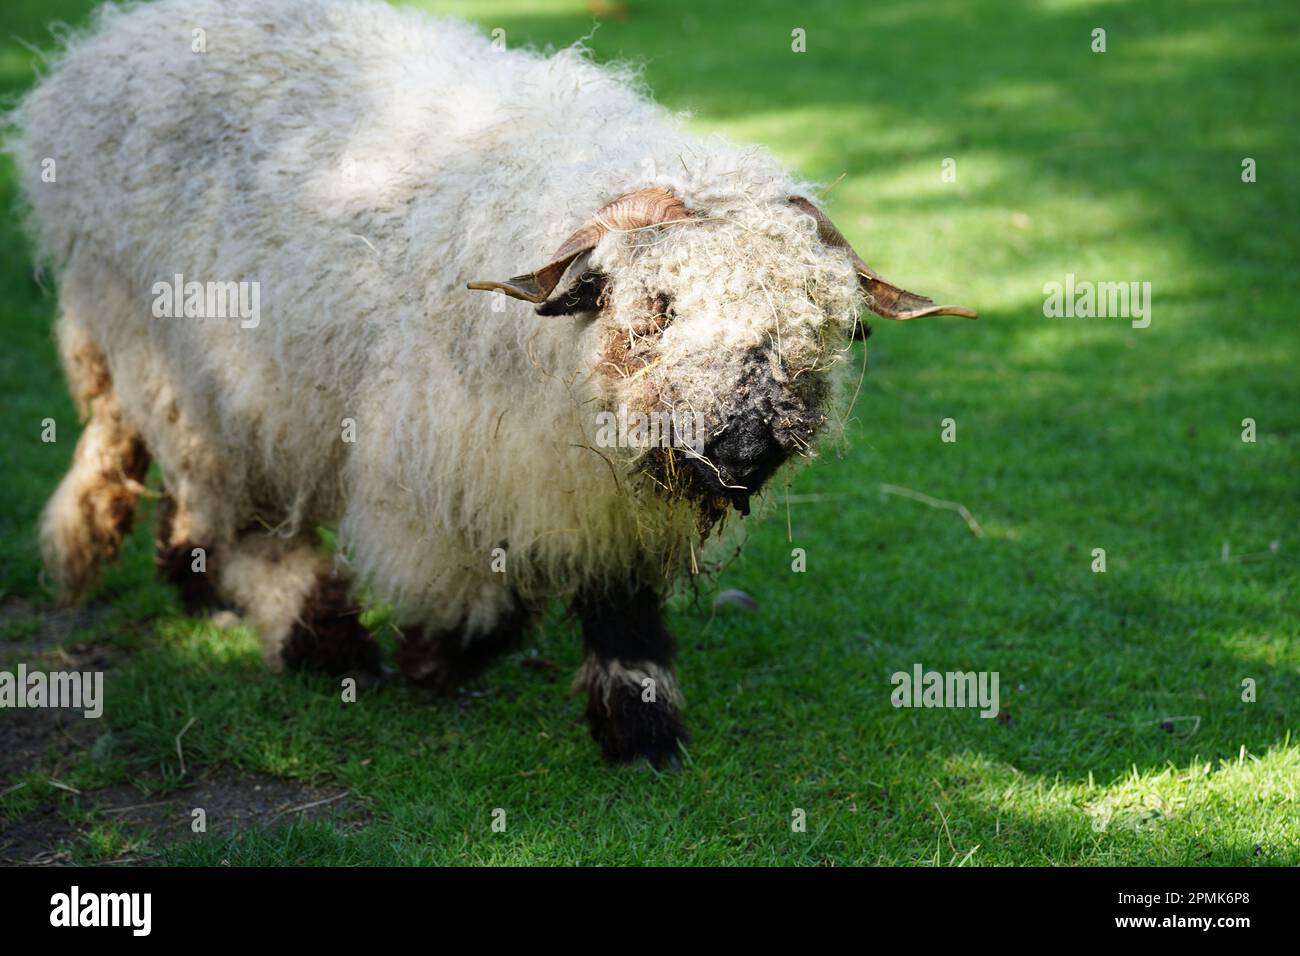 Valais Blacknose sheep, a docile and friendly mountain breed Stock Photo